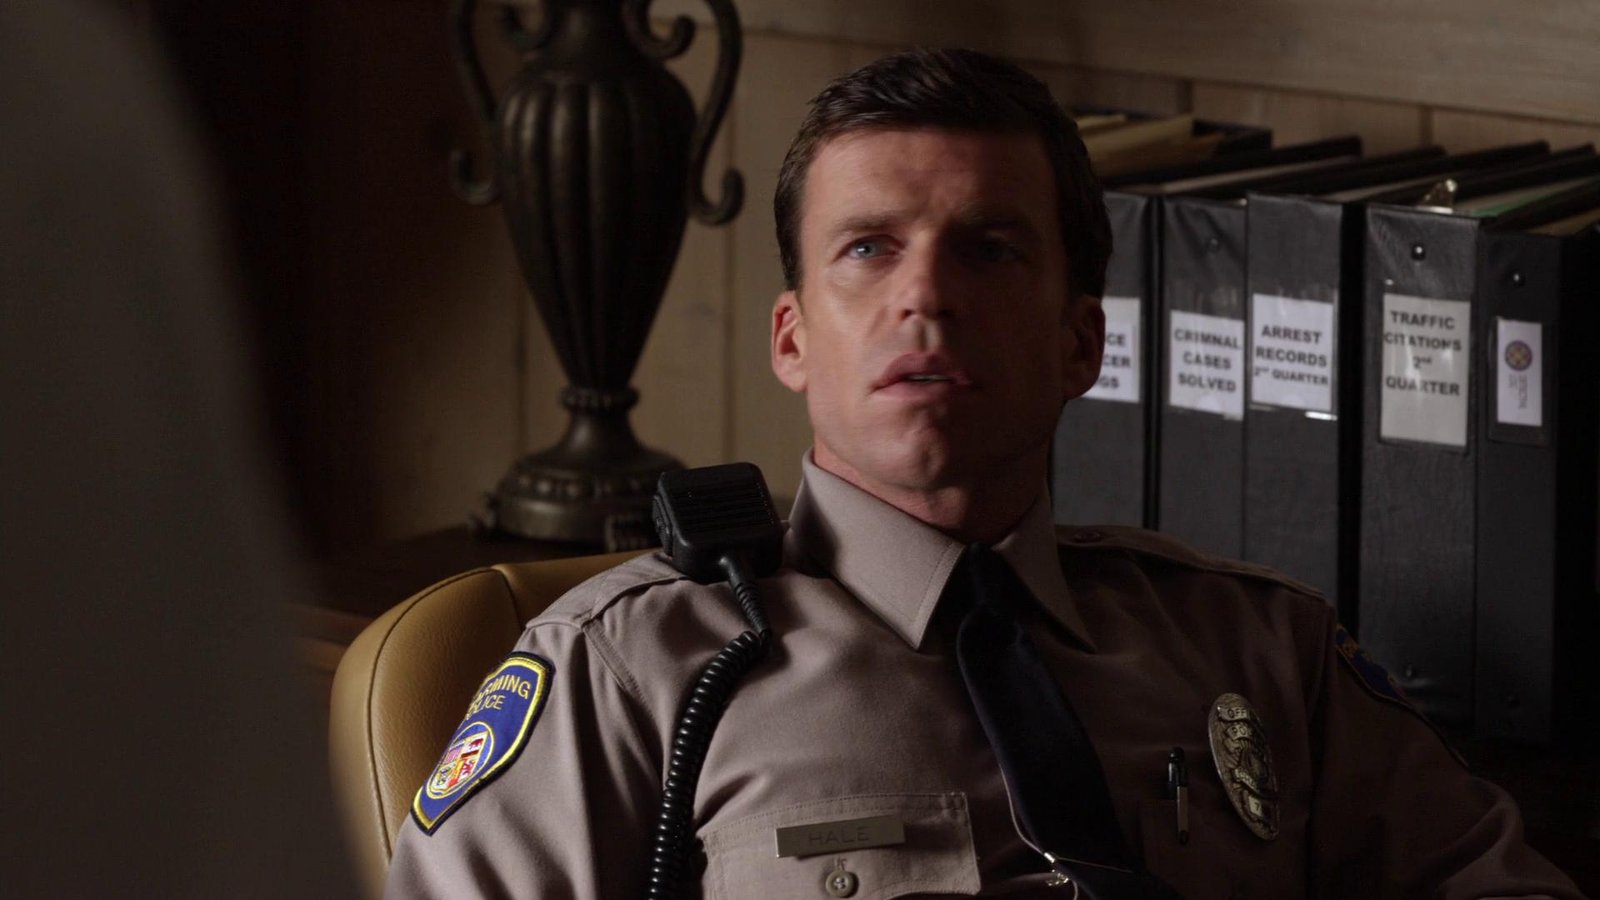 Taylor Sheridan as David Hale in Sons of Anarchy (2008-2014)